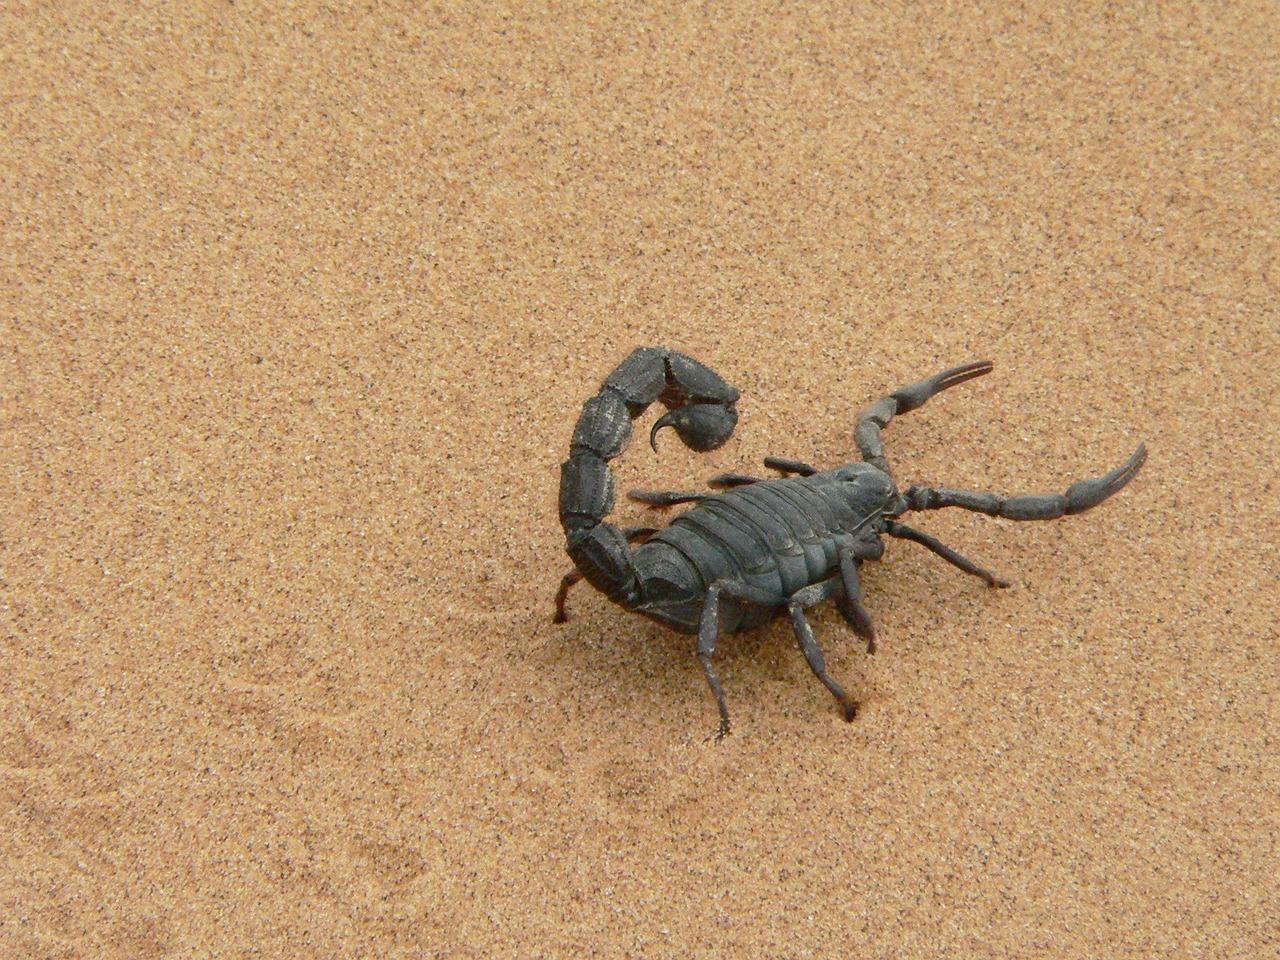 Couple finds poisonous scorpion in luggage after holiday in Namibia